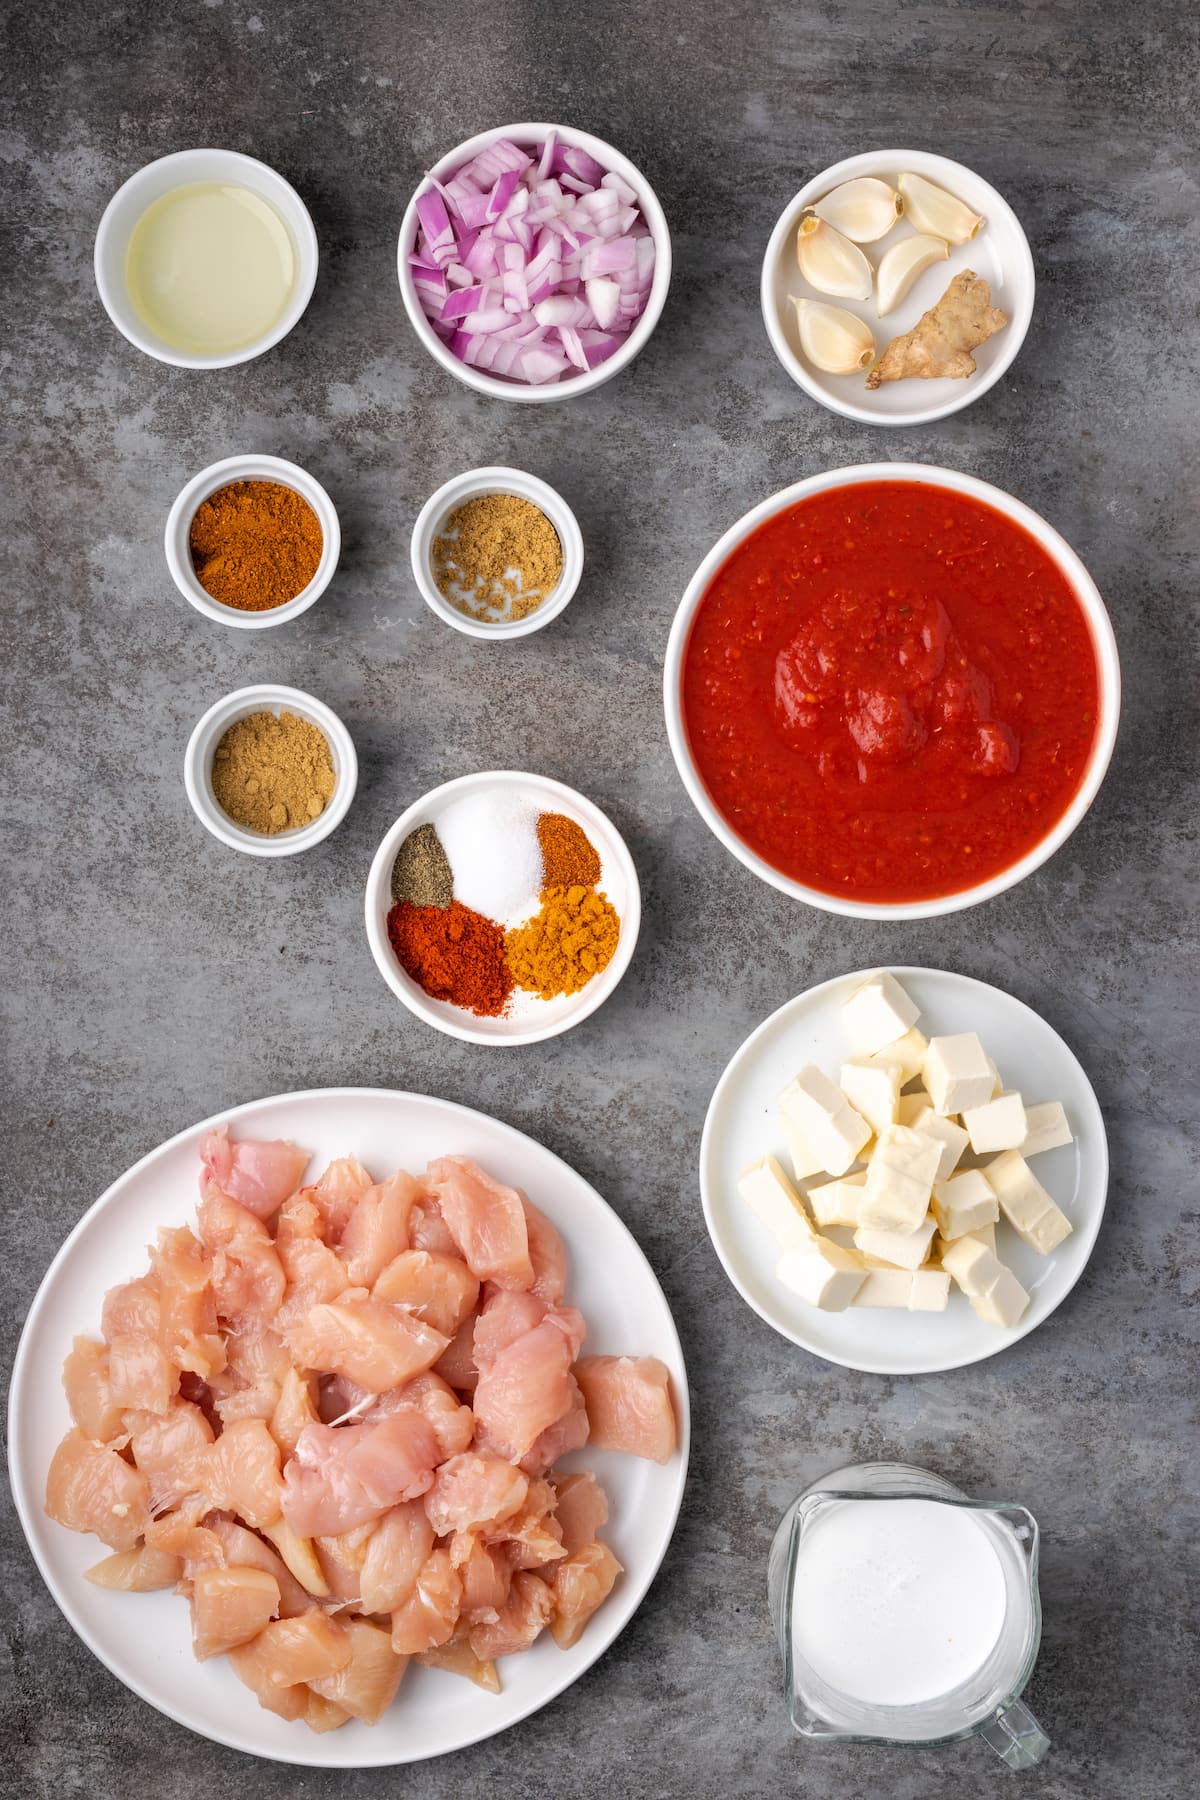 The ingredients for Instant Pot butter chicken.